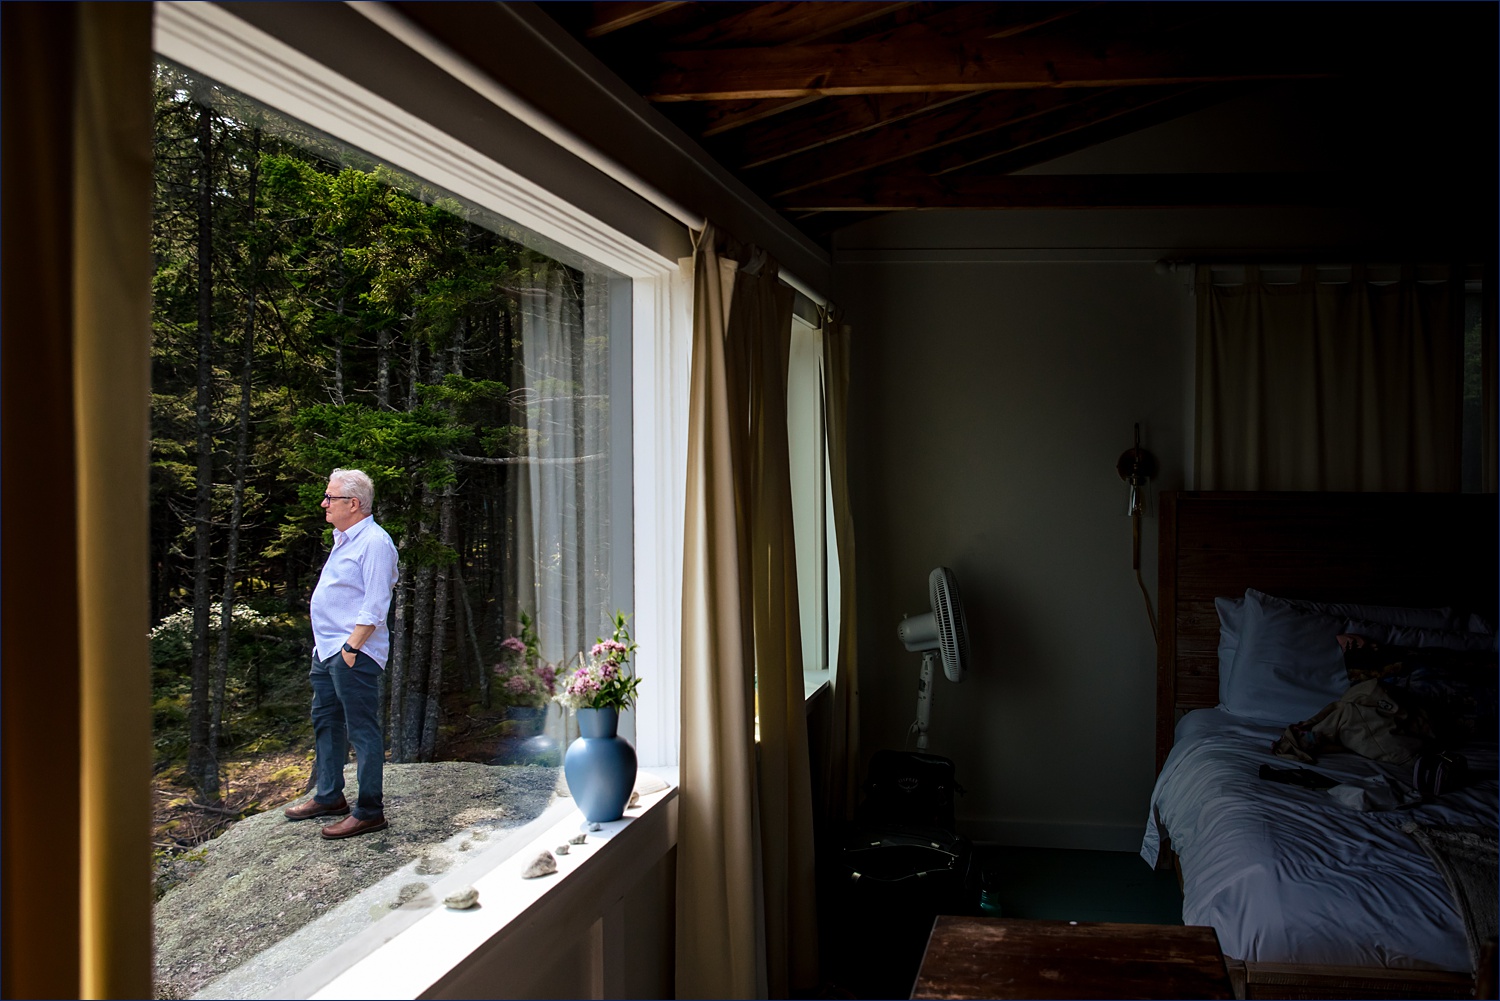 The bride's father waits outside for his daughter on her Maine wedding day